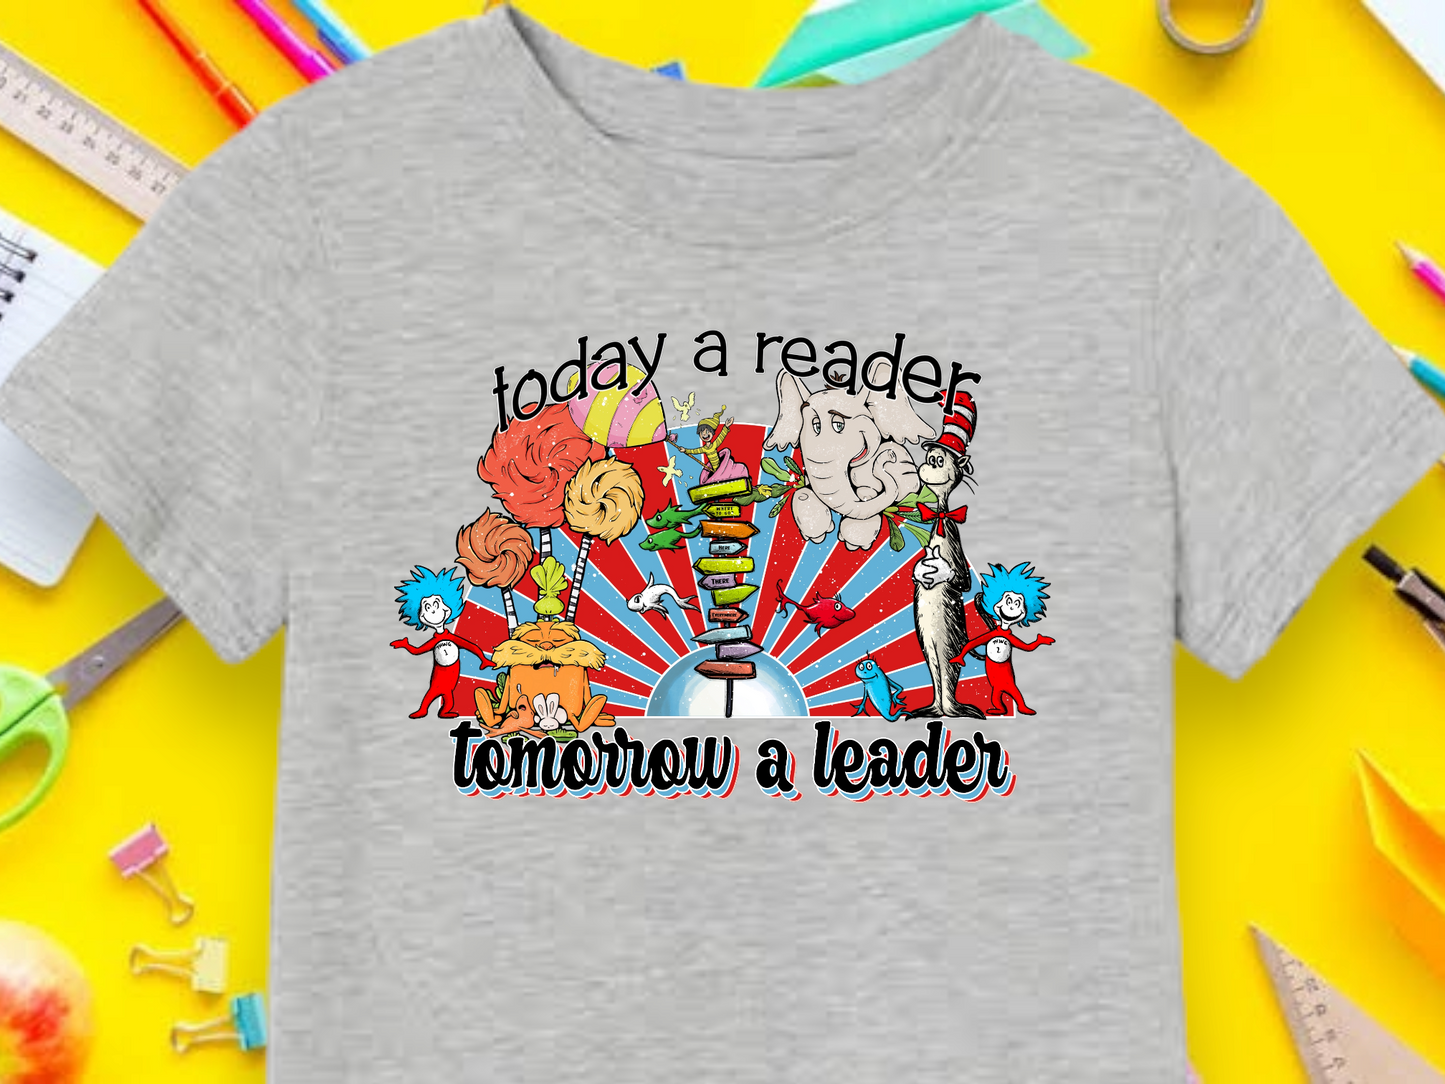 TODAY A READER TOMORROW A LEADER